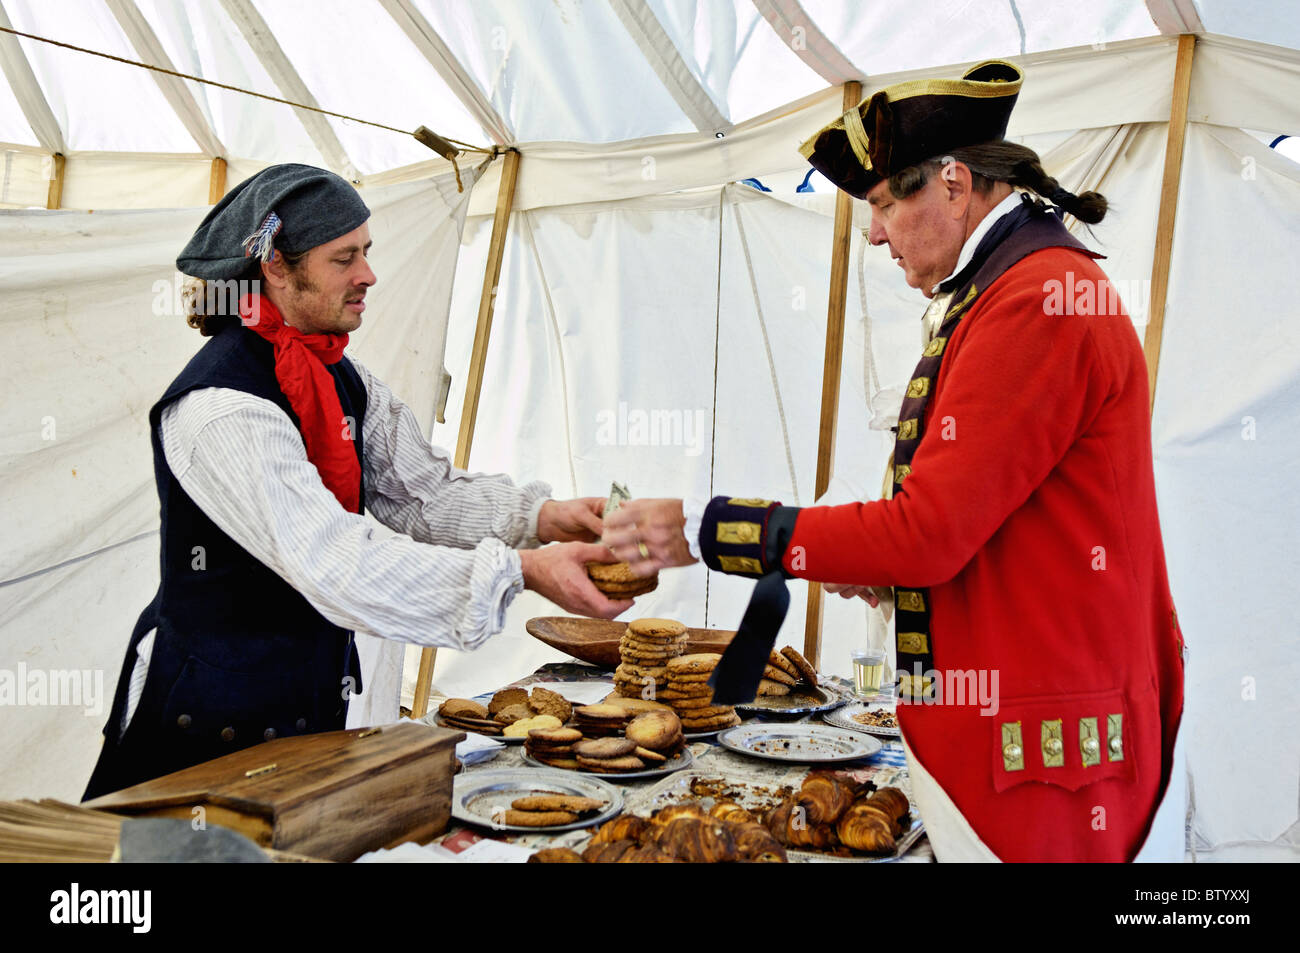 British Revolutionary War Soldier Buying Baked Goods from Baker in Period Costume at Locust Grove in Louisville, Kentucky Stock Photo